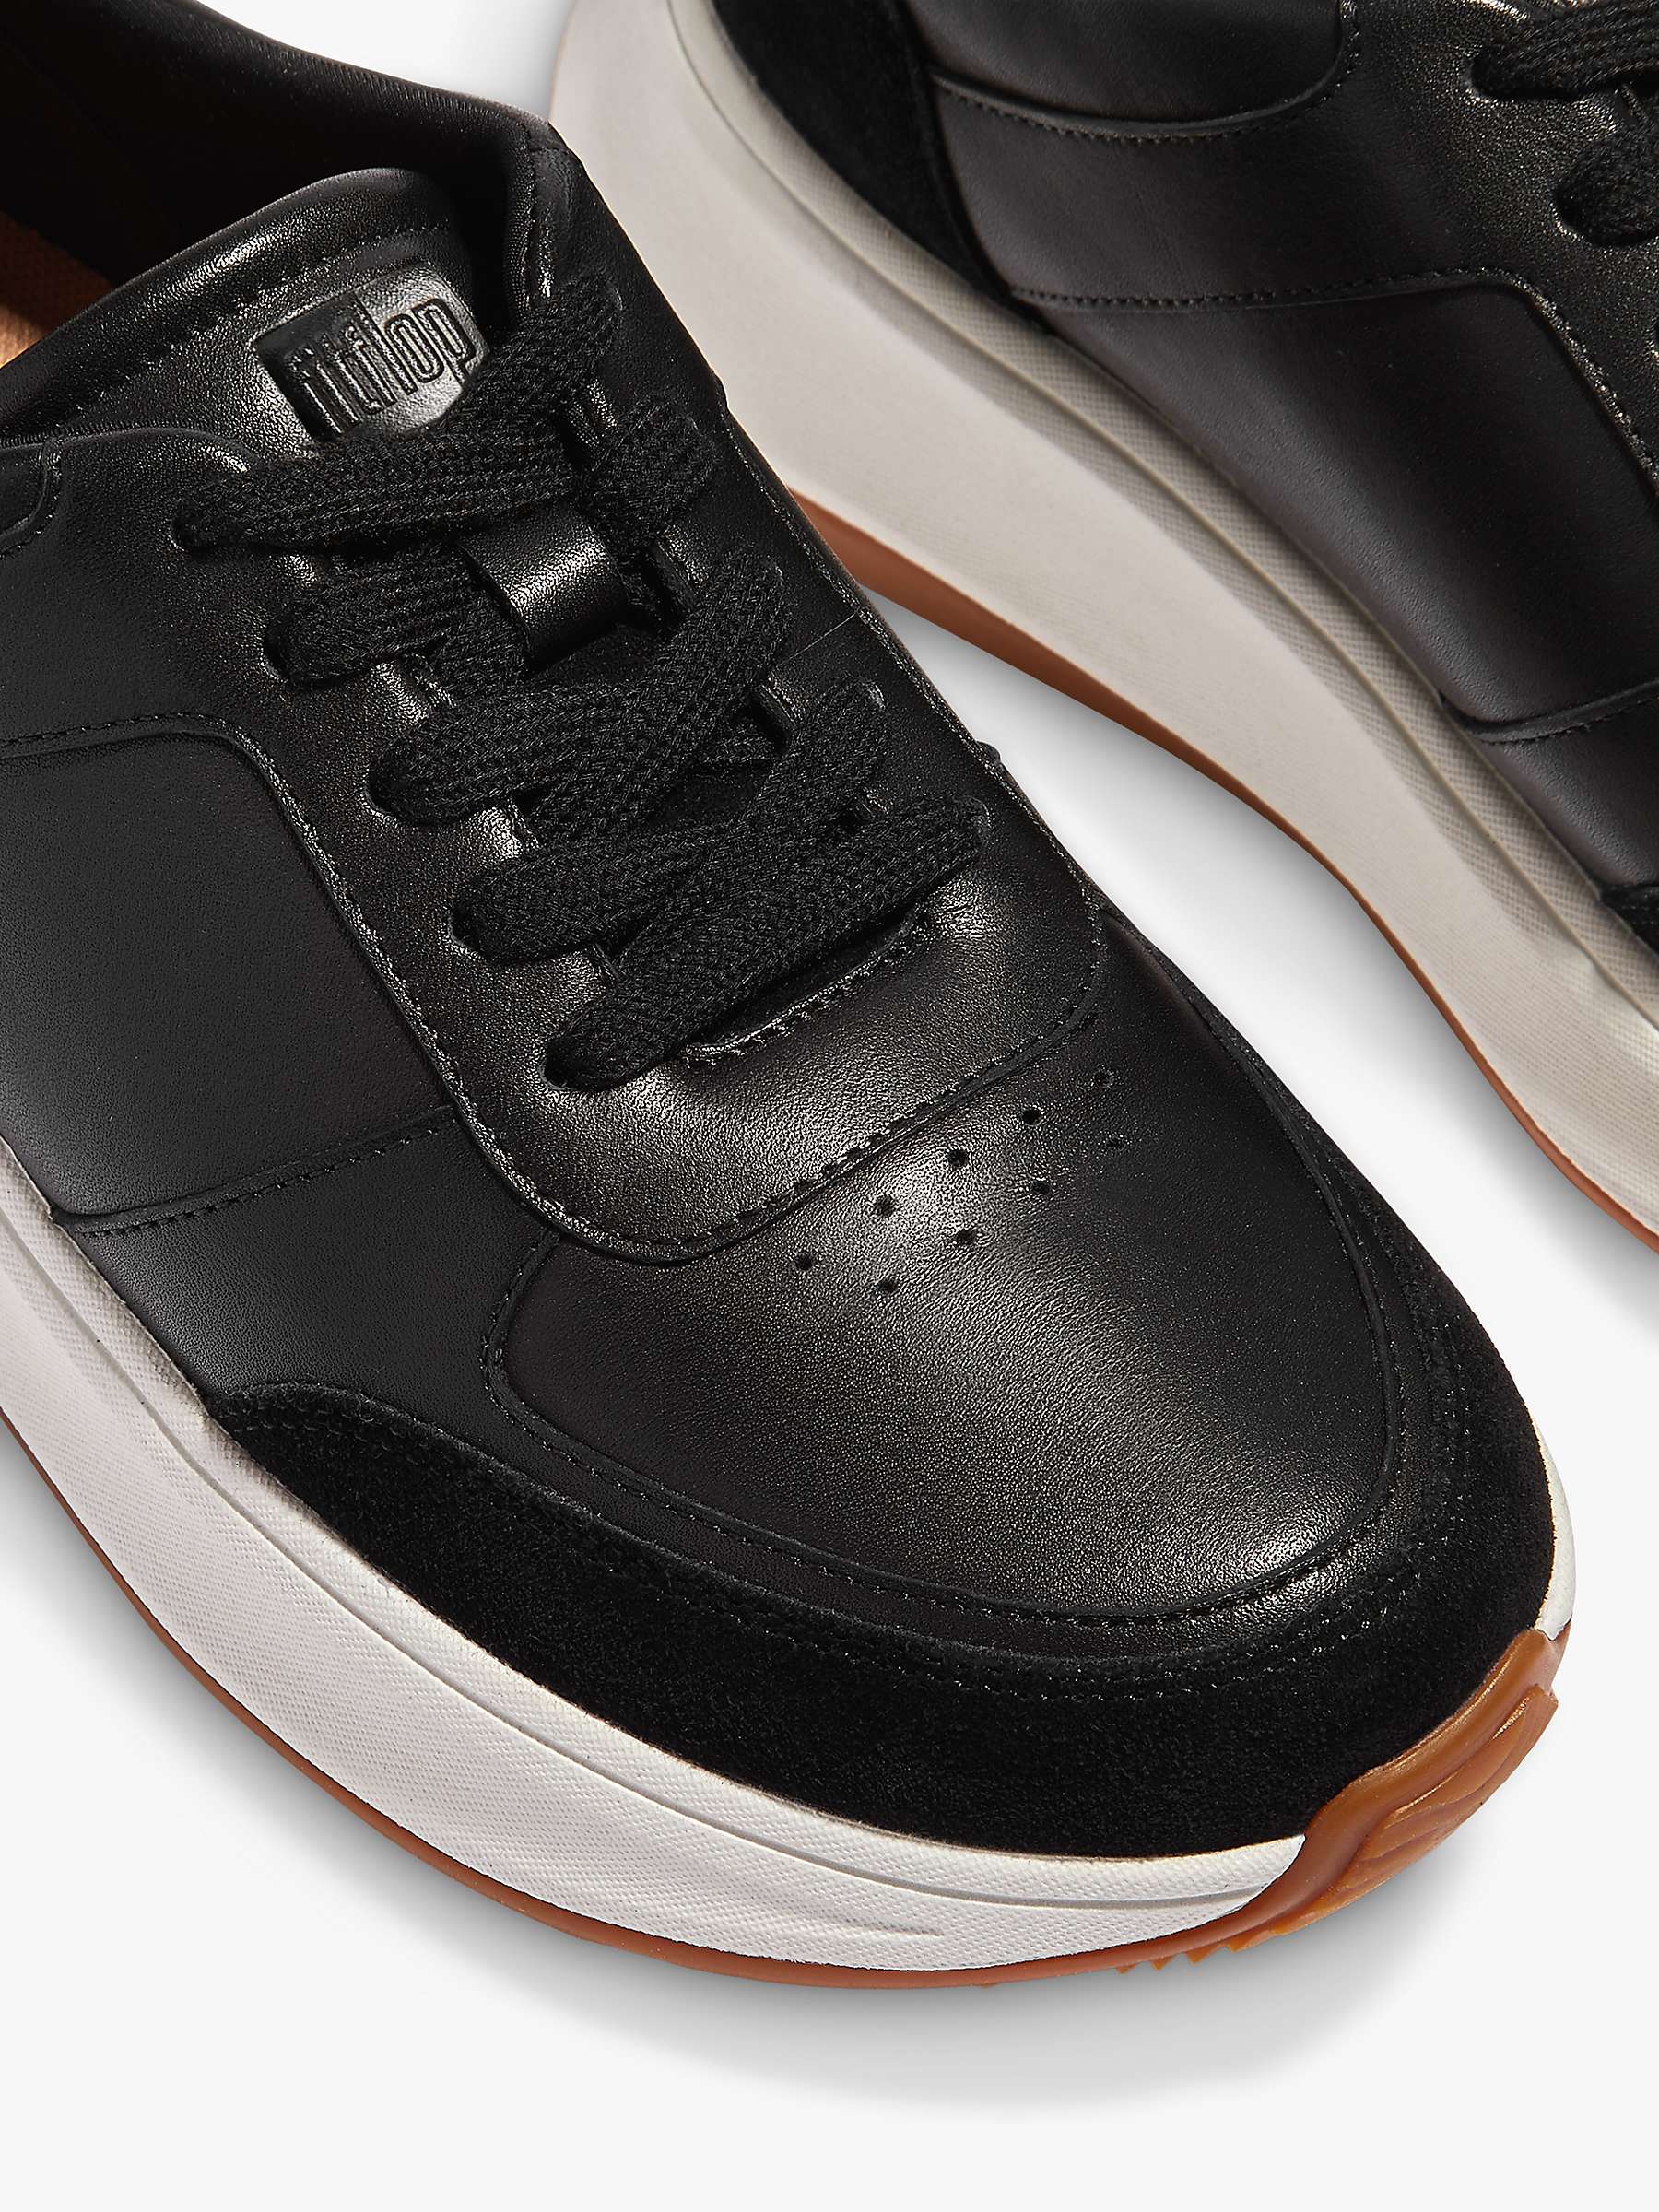 Buy FitFlop Stacked Leather Trainers, Black Online at johnlewis.com